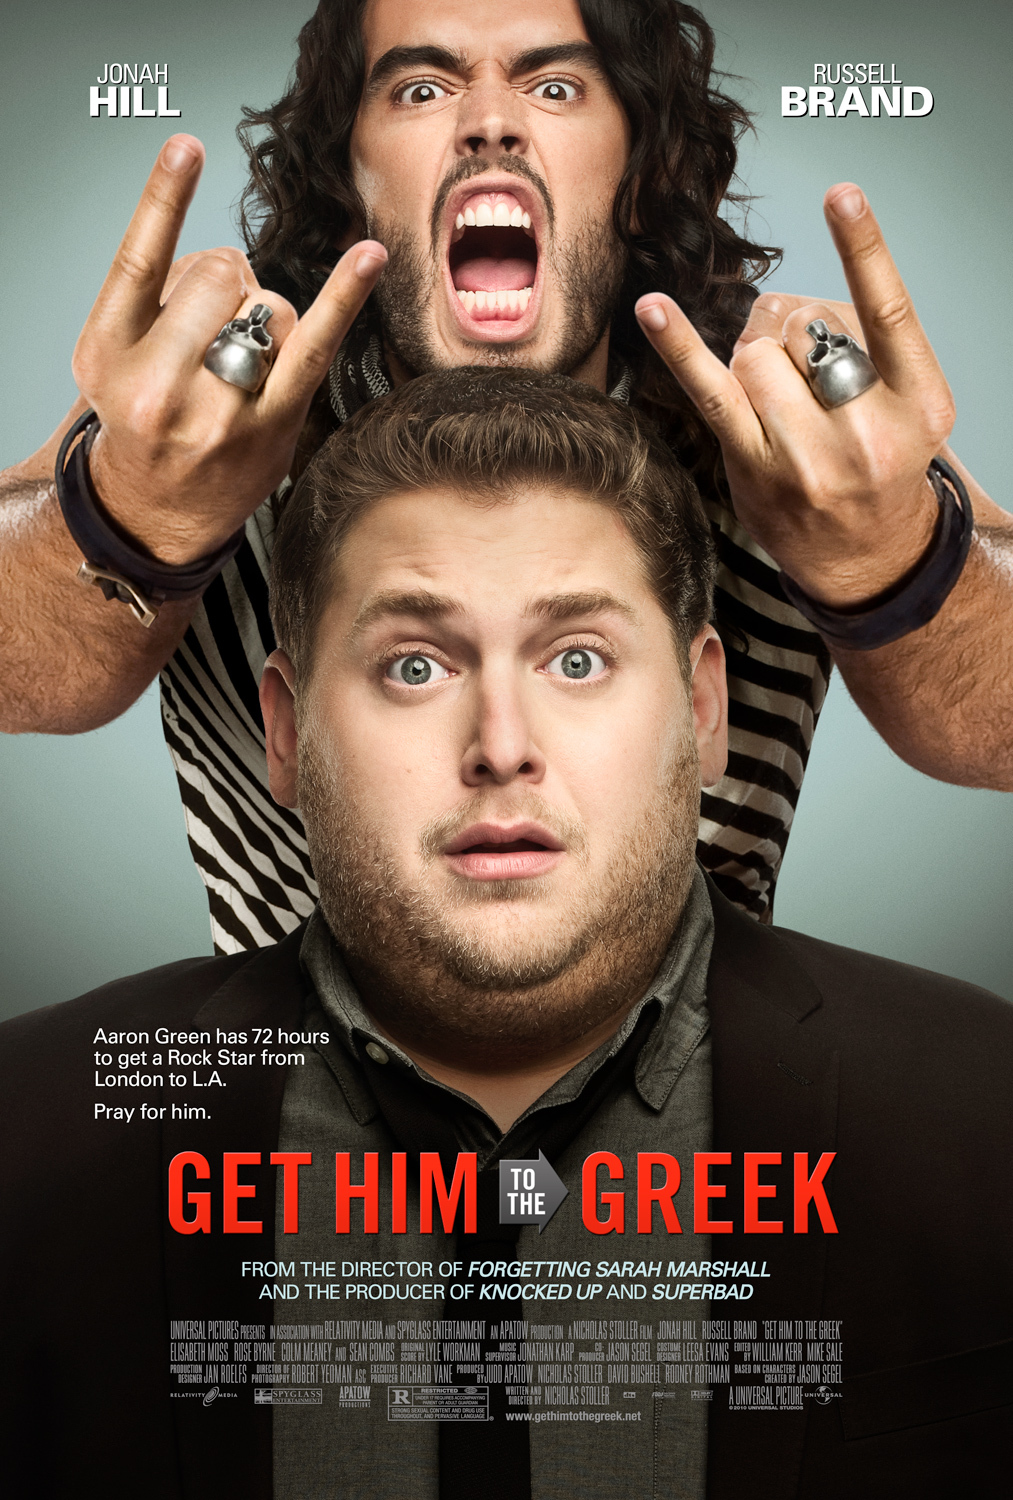 Russell Brand and Jonah Hill in Get Him to the Greek (2010)